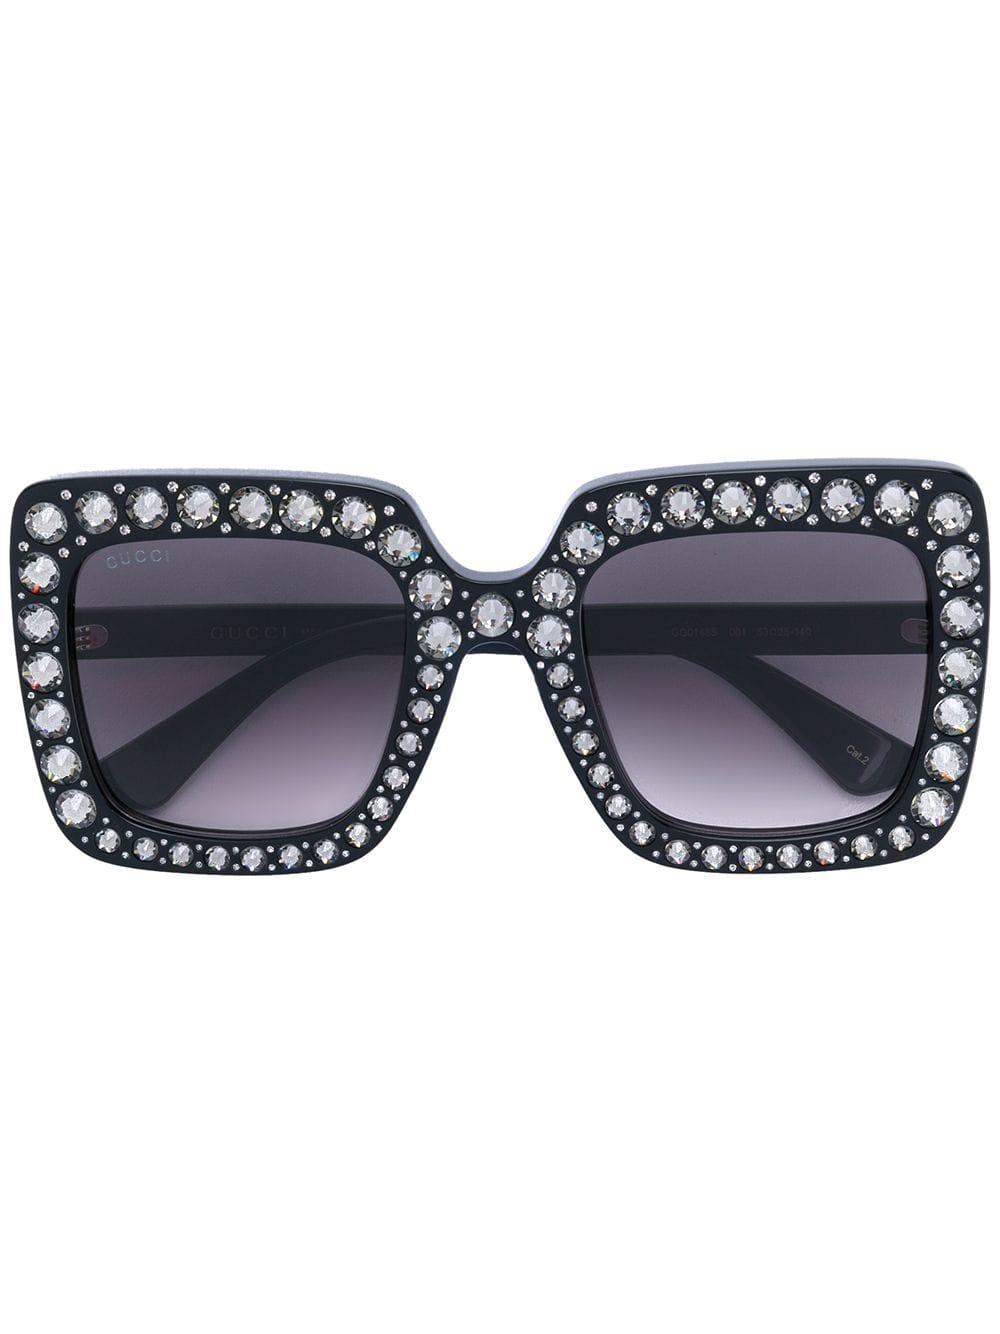 Gucci Oversize Square-frame Sunglasses With Crystals in Black | Lyst